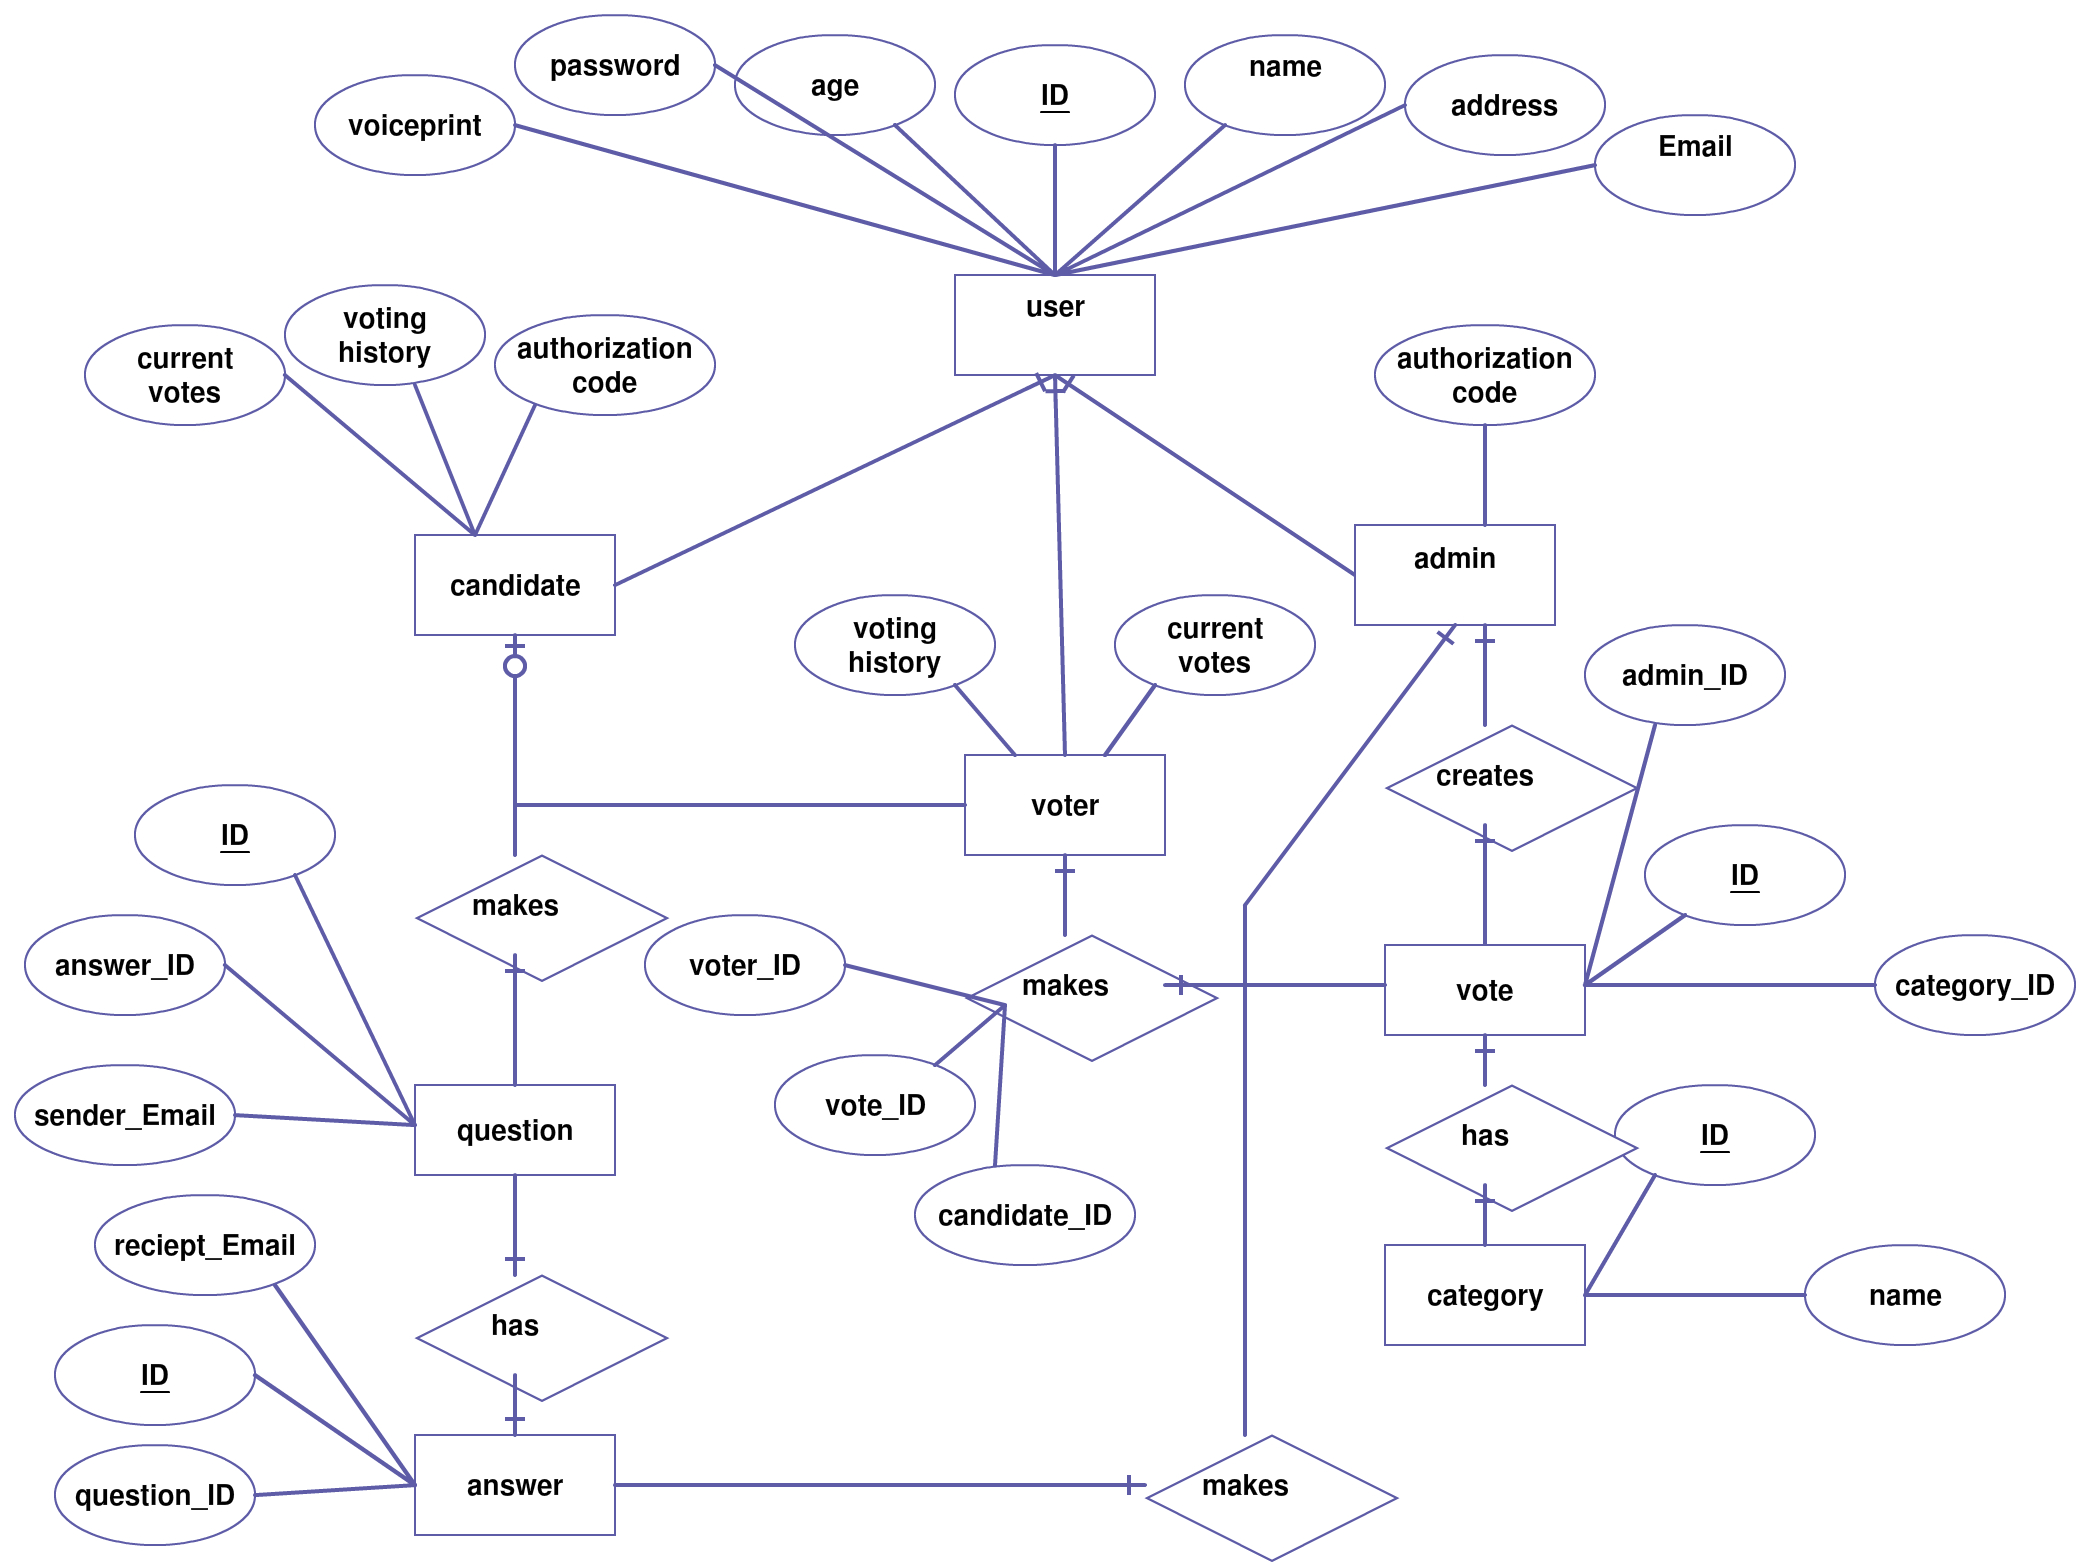 Pin On Entity Relationship Diagram Templates inside Er Diagram With 10 Entities